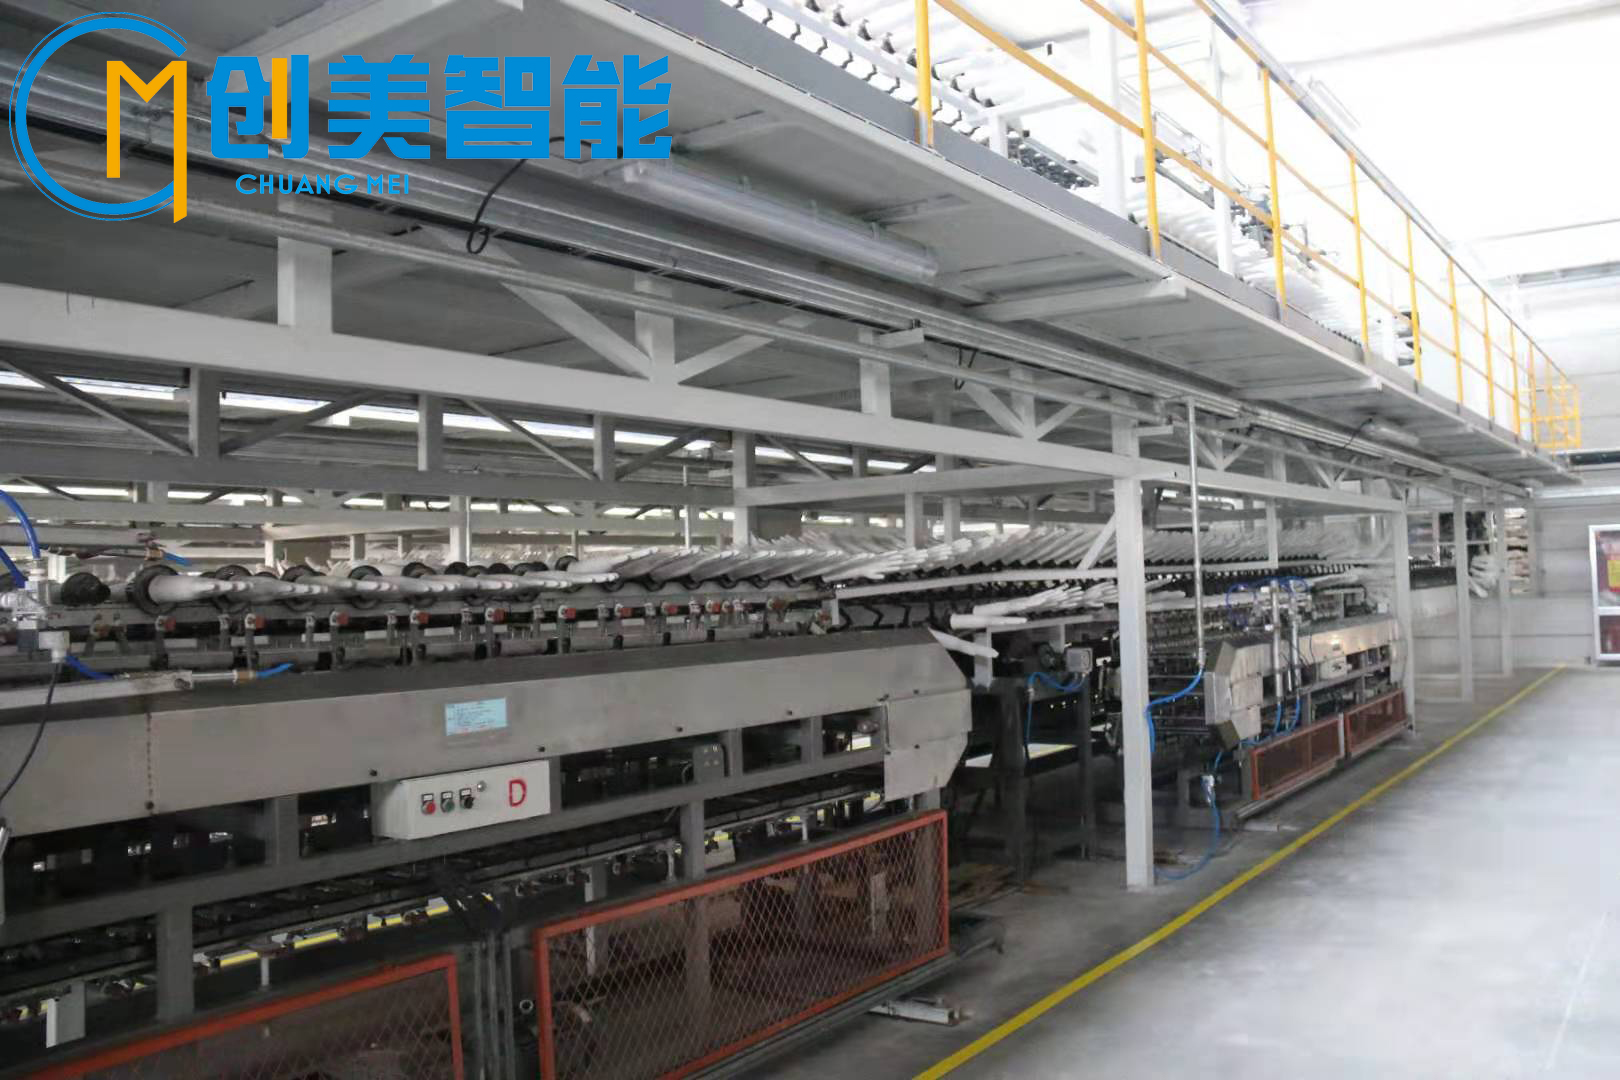 Daily use of PVC glove production equipment 800,000 pcs of PVC glove manufacturing machine per day